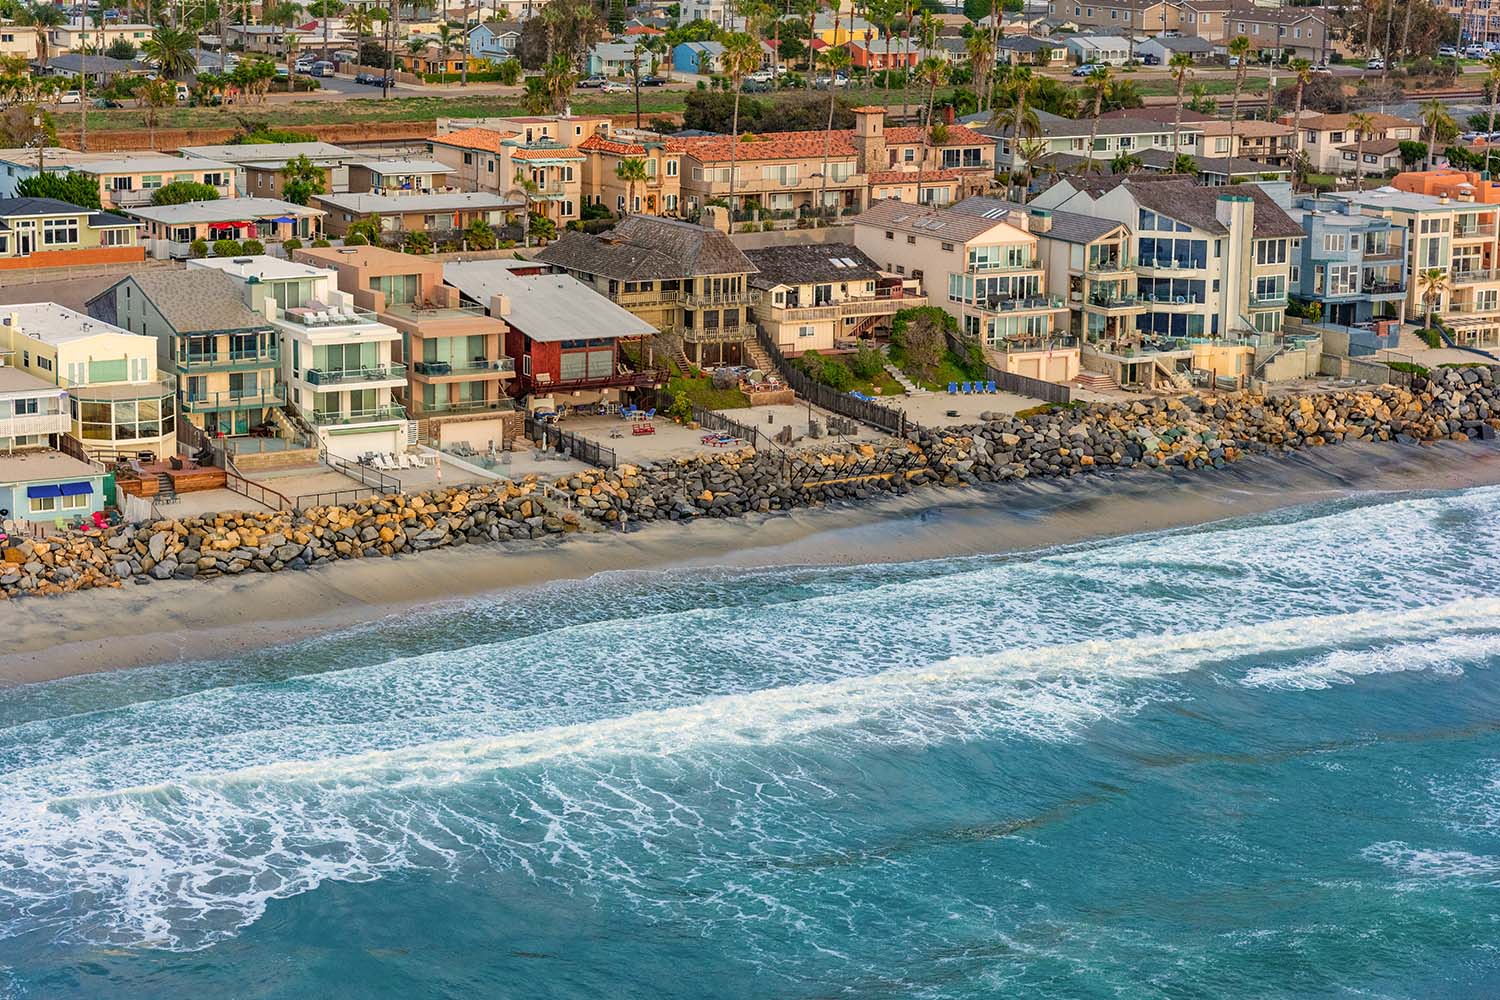 He shot from 800 feet during a helicopter photo flight in the California community of Oceanside in northern San Diego County.